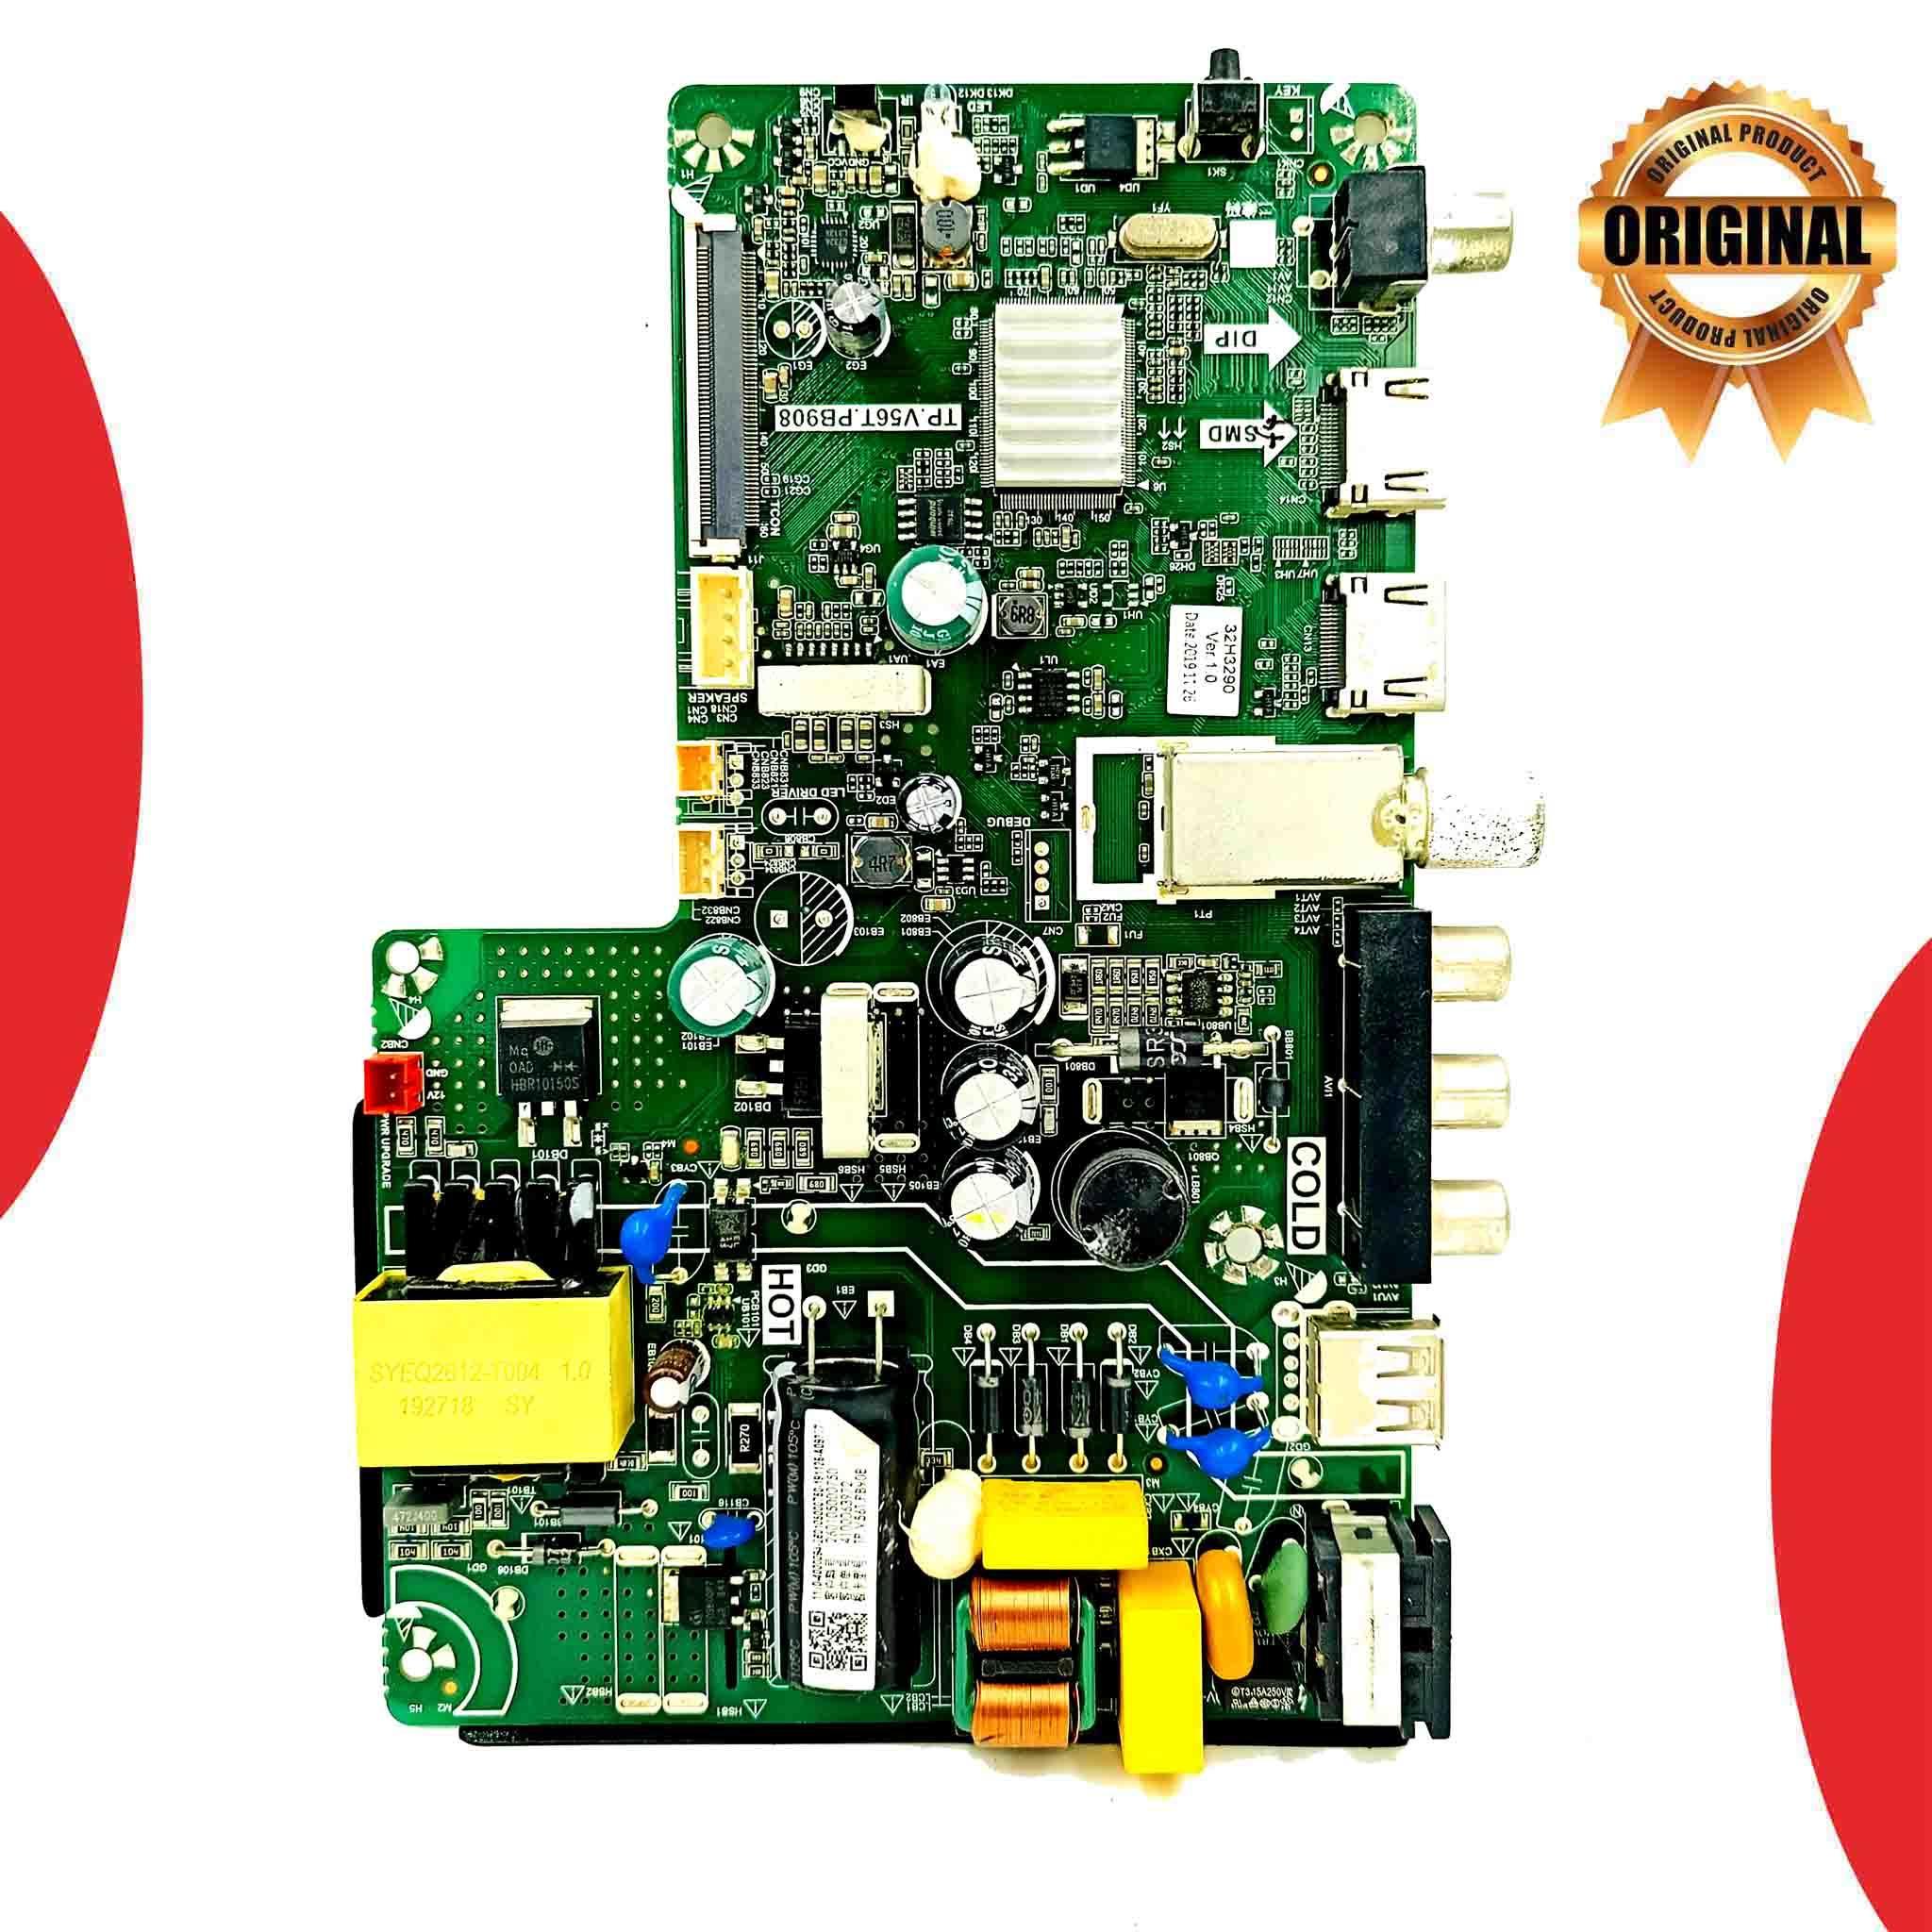 Reconnect 32 inch LED TV Motherboard for Model 32H3290 - Great Bharat Electronics